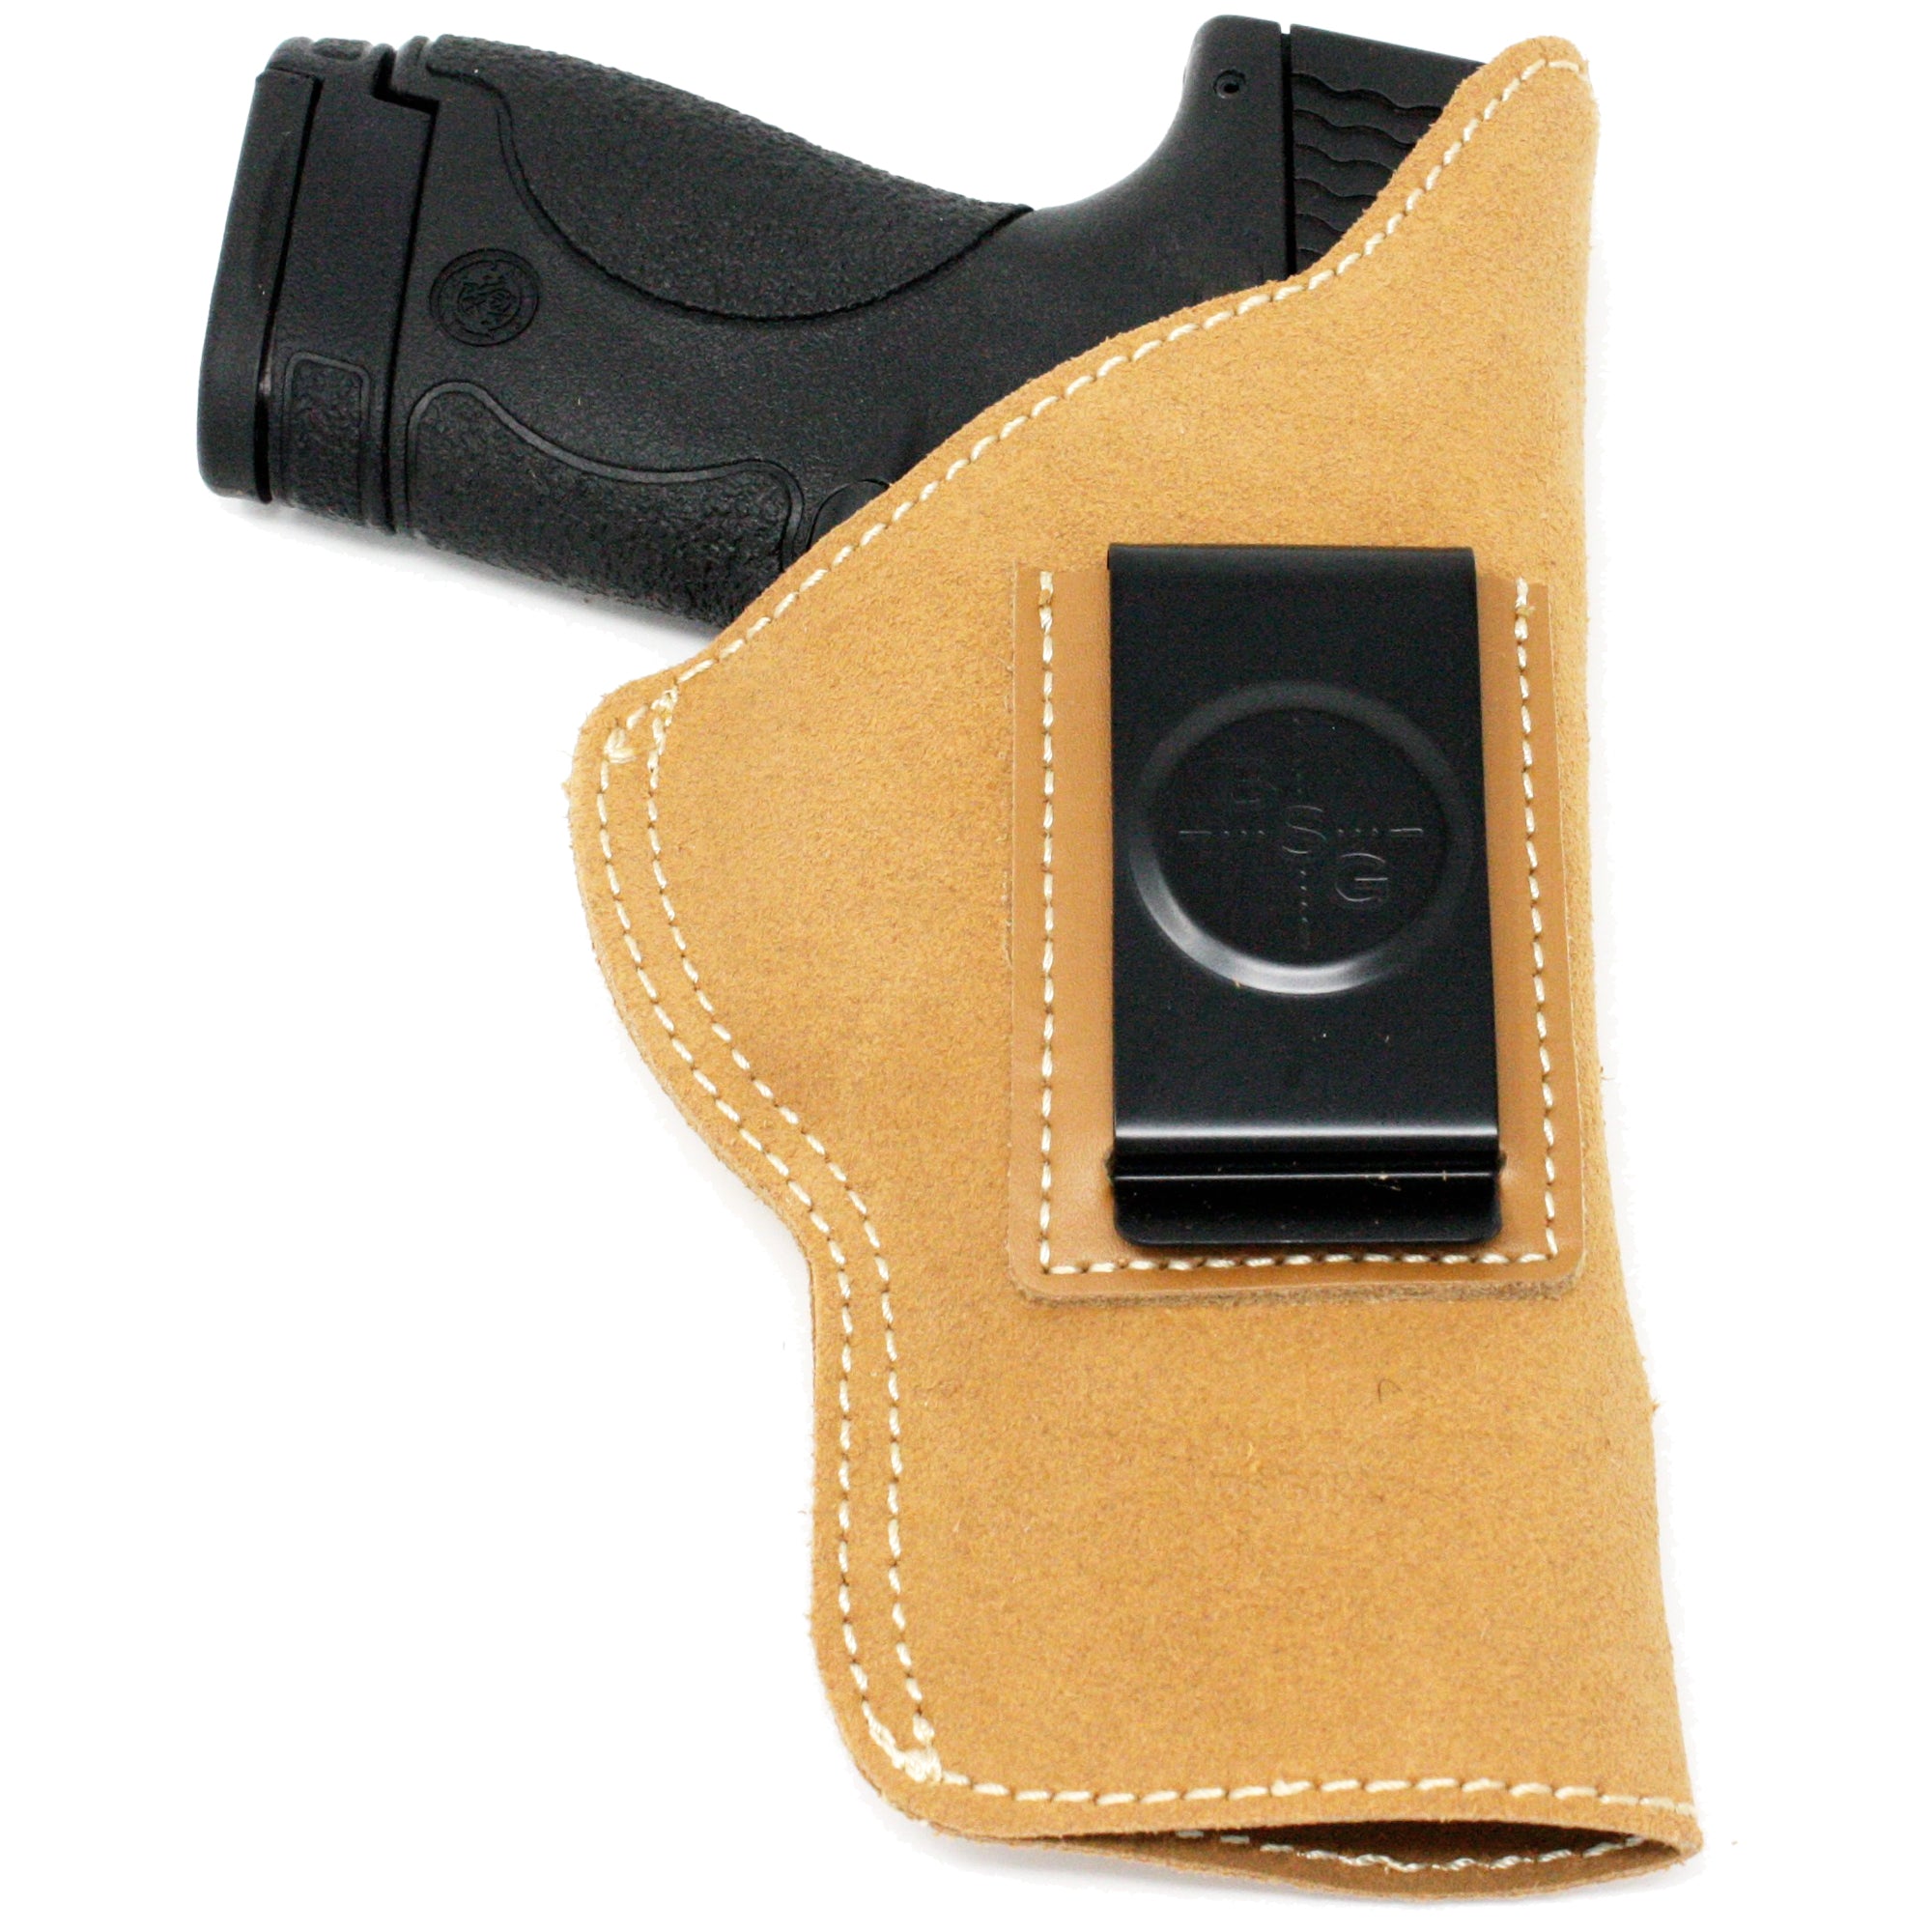 Suede Leather IWB Holster 6'' x 3 7/8''